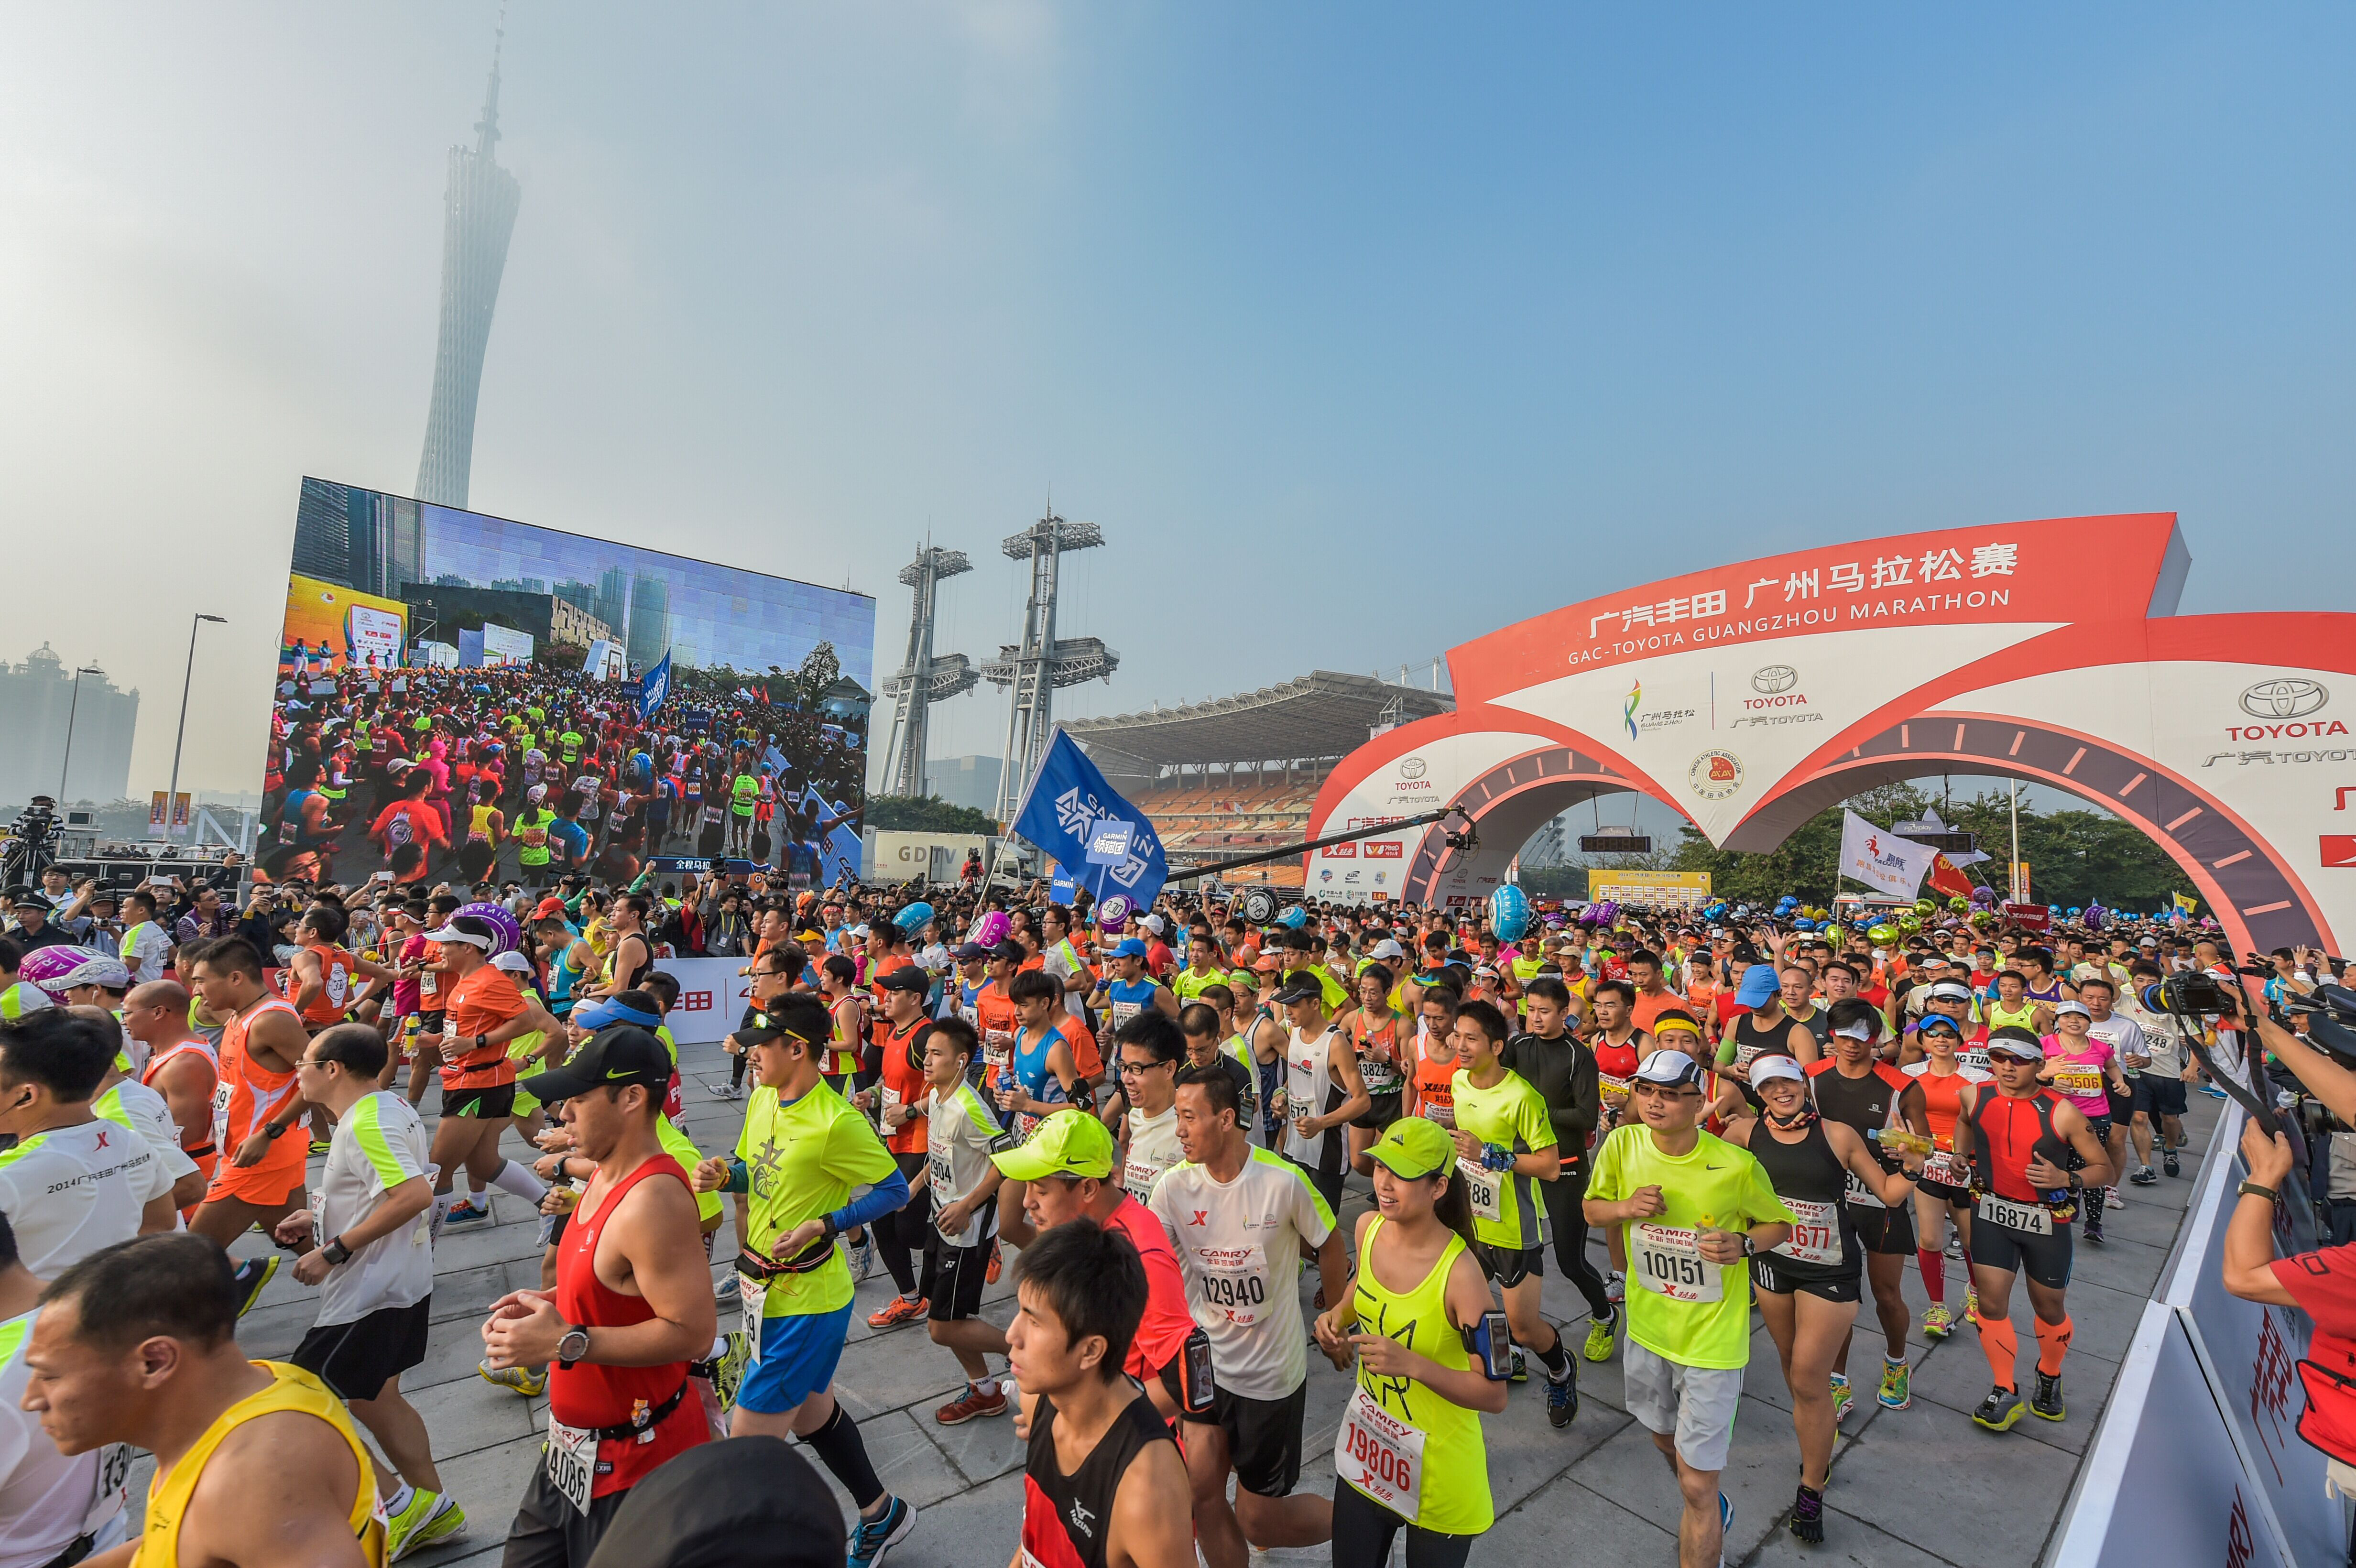 A team of 160 COVID-19 fighters are set to run 2020 Guangzhou Marathon